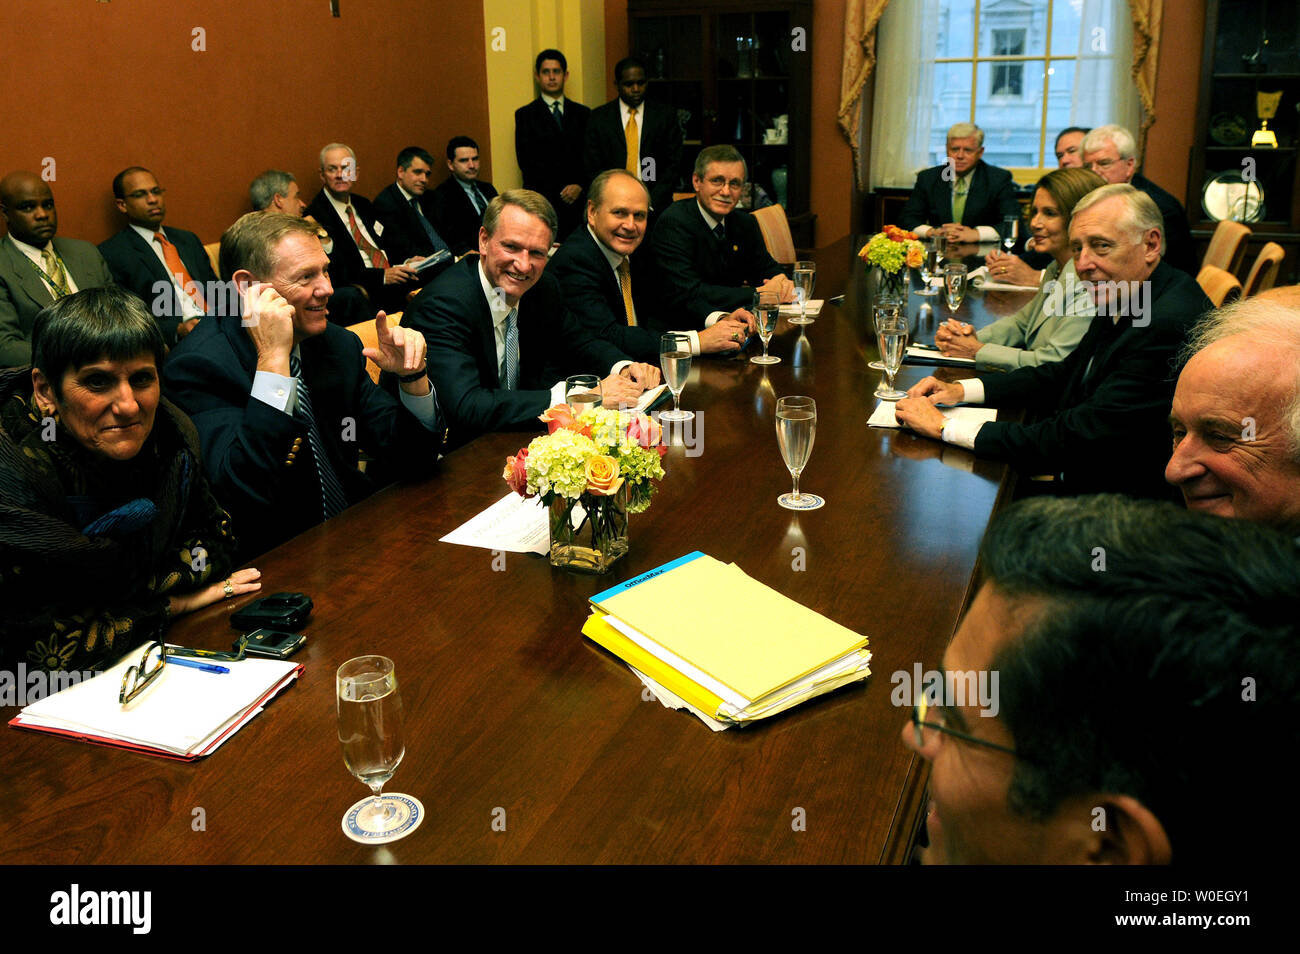 Speaker of the House Nancy Pelosi (D-CA) (4th-R), House Majority Leader Steny Hoyer (D-MD) (3rd-R) and other representatives meet with Alan Mulally (2nd-L), President and CEO of Ford Motor Co., Rick Wagoner (3rd-LL), CEO of General Motors Corp., Robert Nardelli (4th-L), Chairman and CEO of Chrysler LLC and Ron Gettelfinger (5th-L), President of the United Auto Workers Union, in her office on Capitol Hill in Washington on November 6, 2008. The automakers were discussing the possibility of a government bailout. (UPI Photo/Kevin Dietsch) Stock Photo